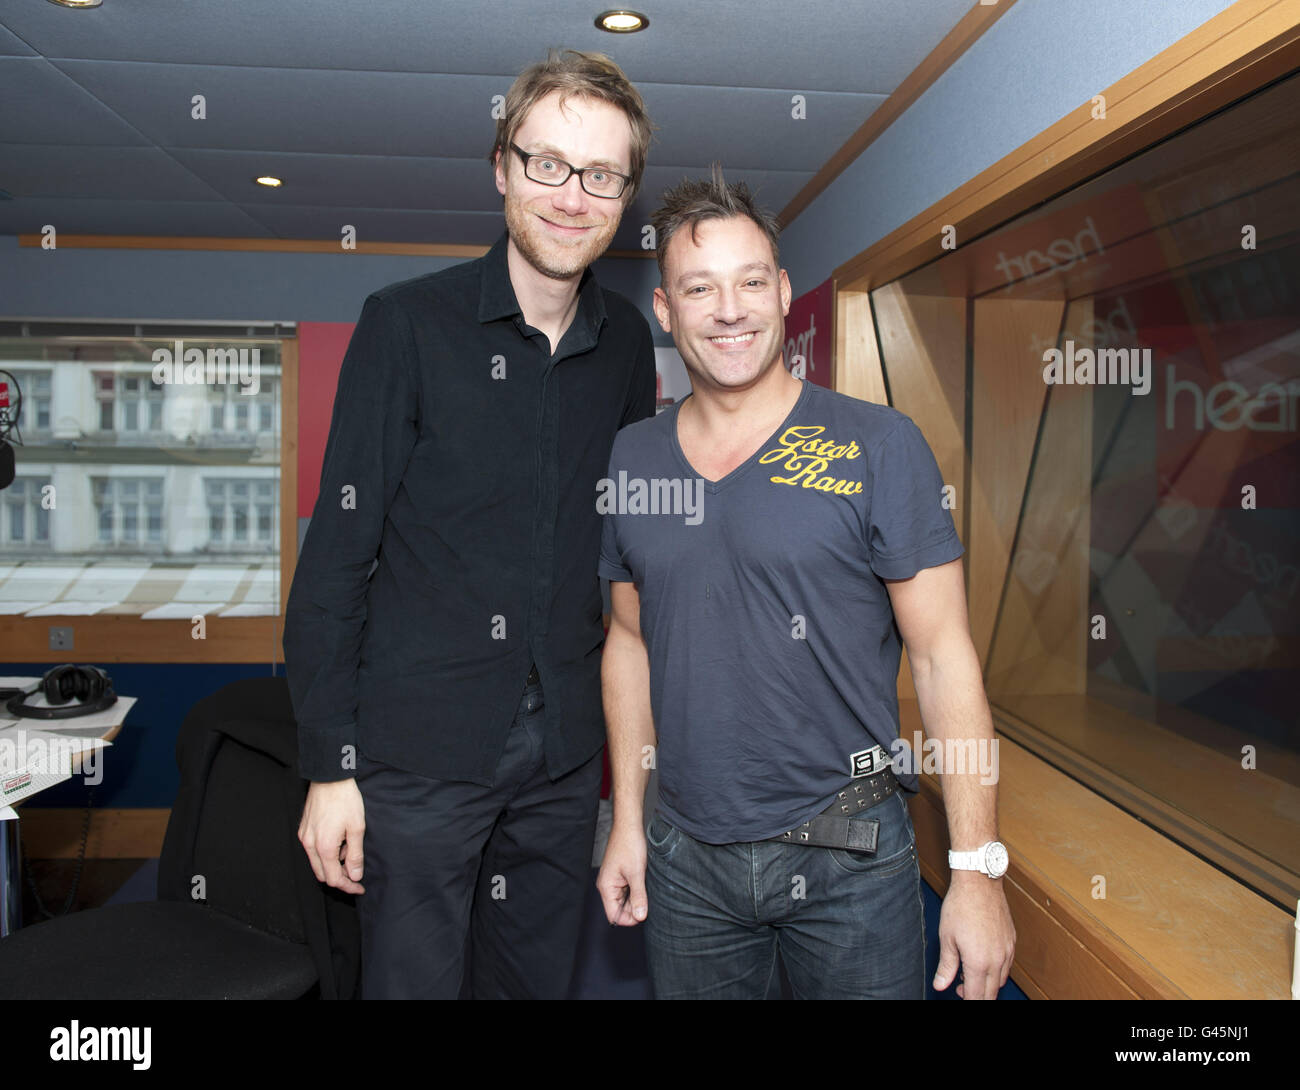 Stephen Merchant (left) and Toby Anstis during the 2011 Have a Heart appeal, Heart FM's charity raising money for Children's Hospices UK, at the Heart FM studios in central London. Stock Photo